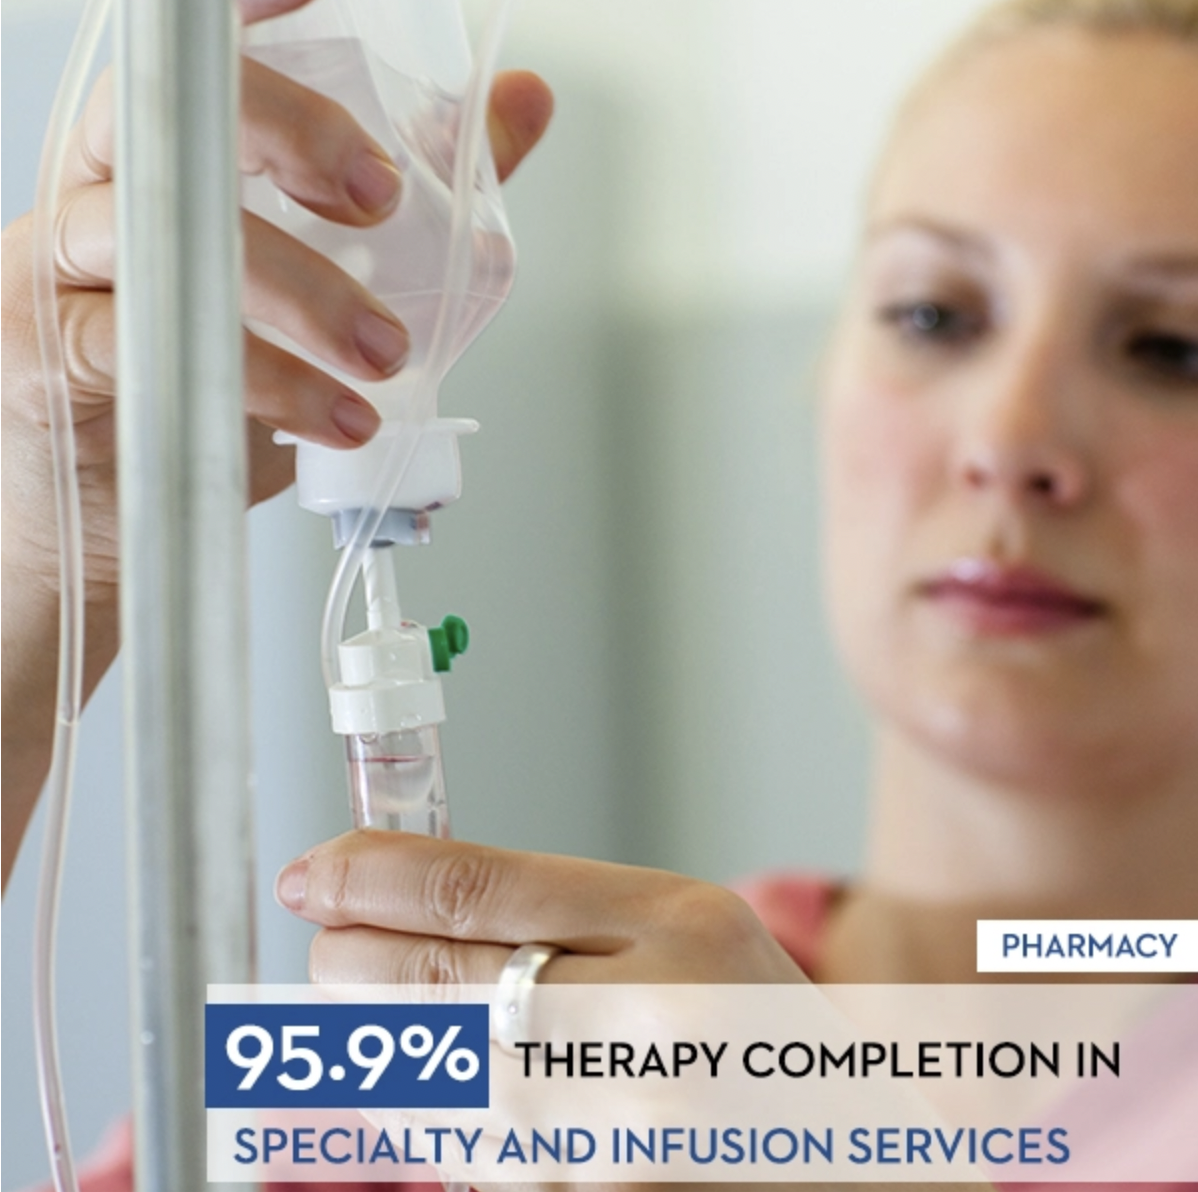 Pharmacy - 95.9% therapy completion in specialty and infusion services